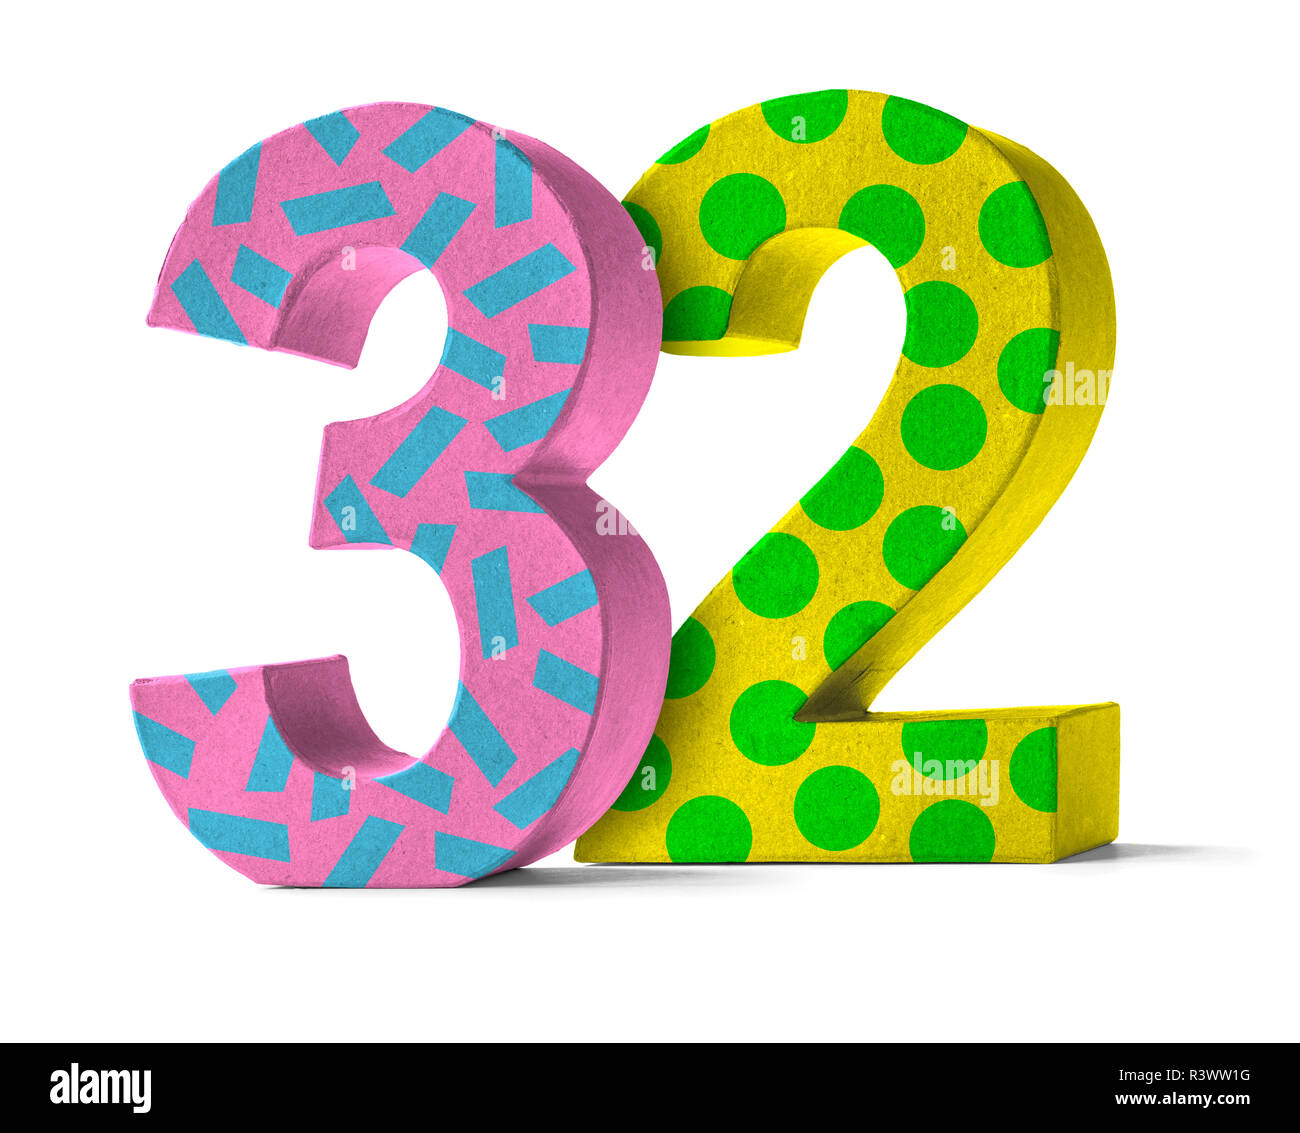 Number 32 High Resolution Stock Photography and Images - Alamy